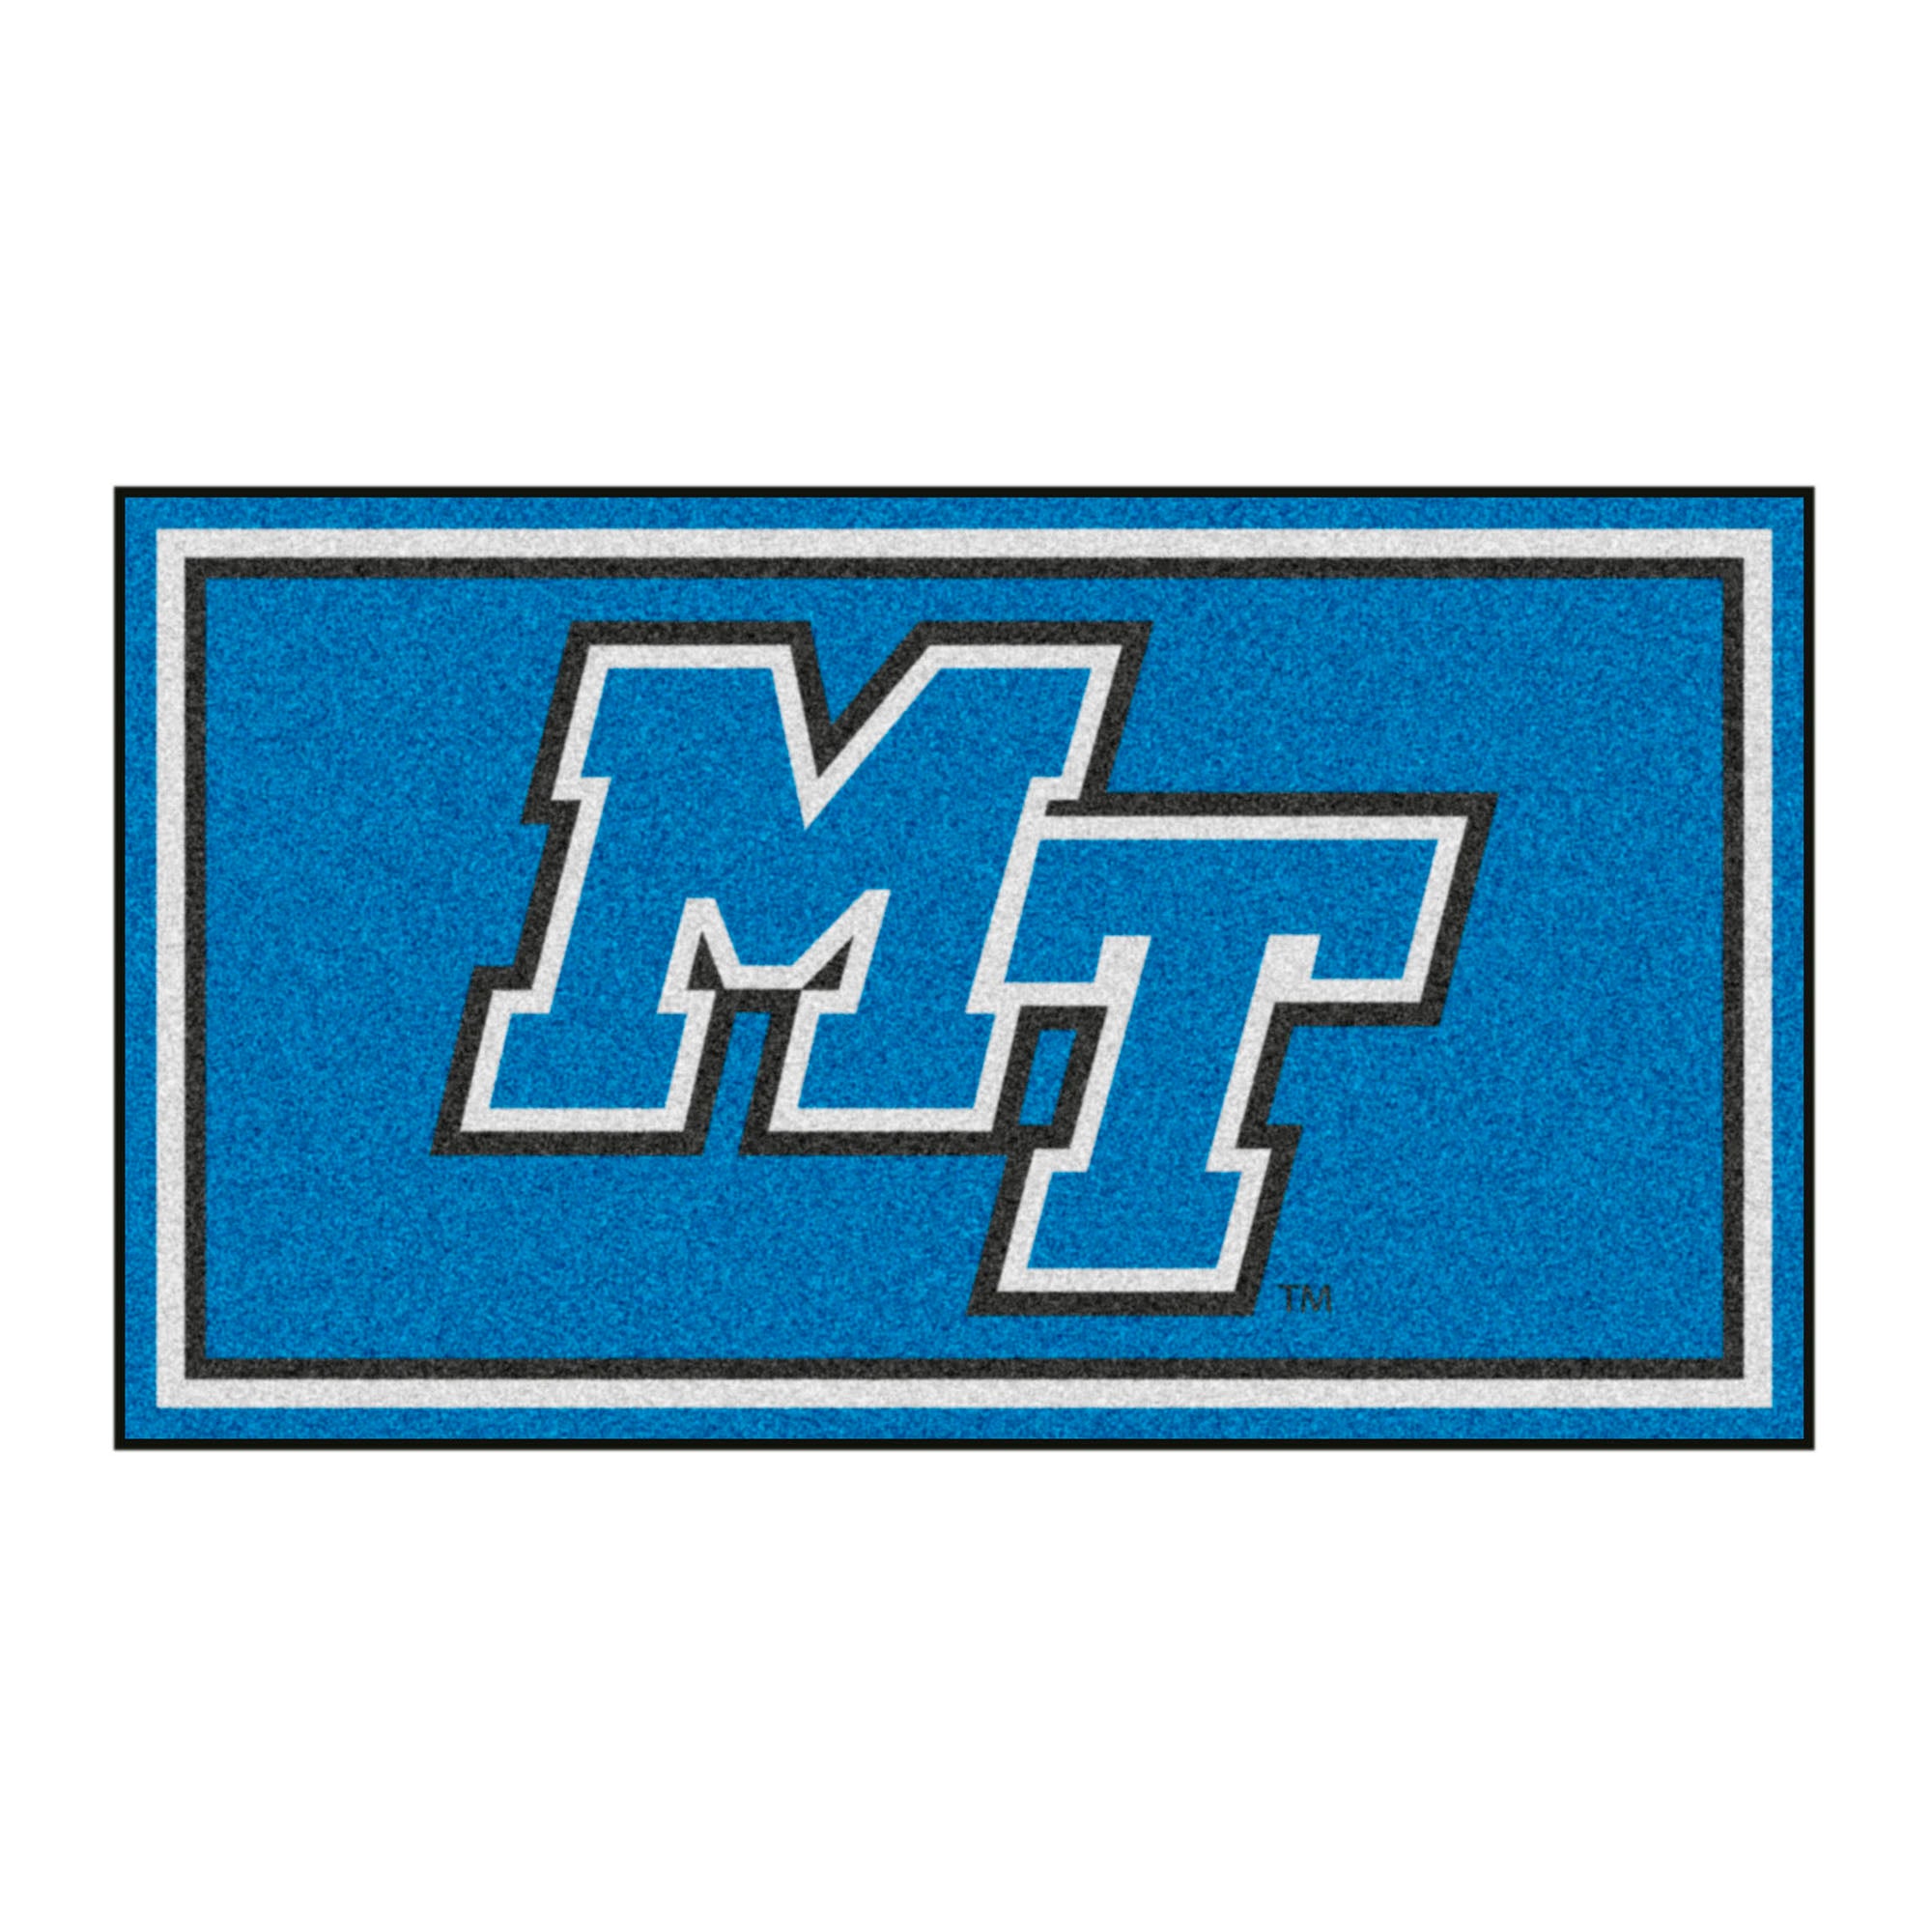 FANMATS, Middle Tennessee State University 3ft. x 5ft. Plush Area Rug